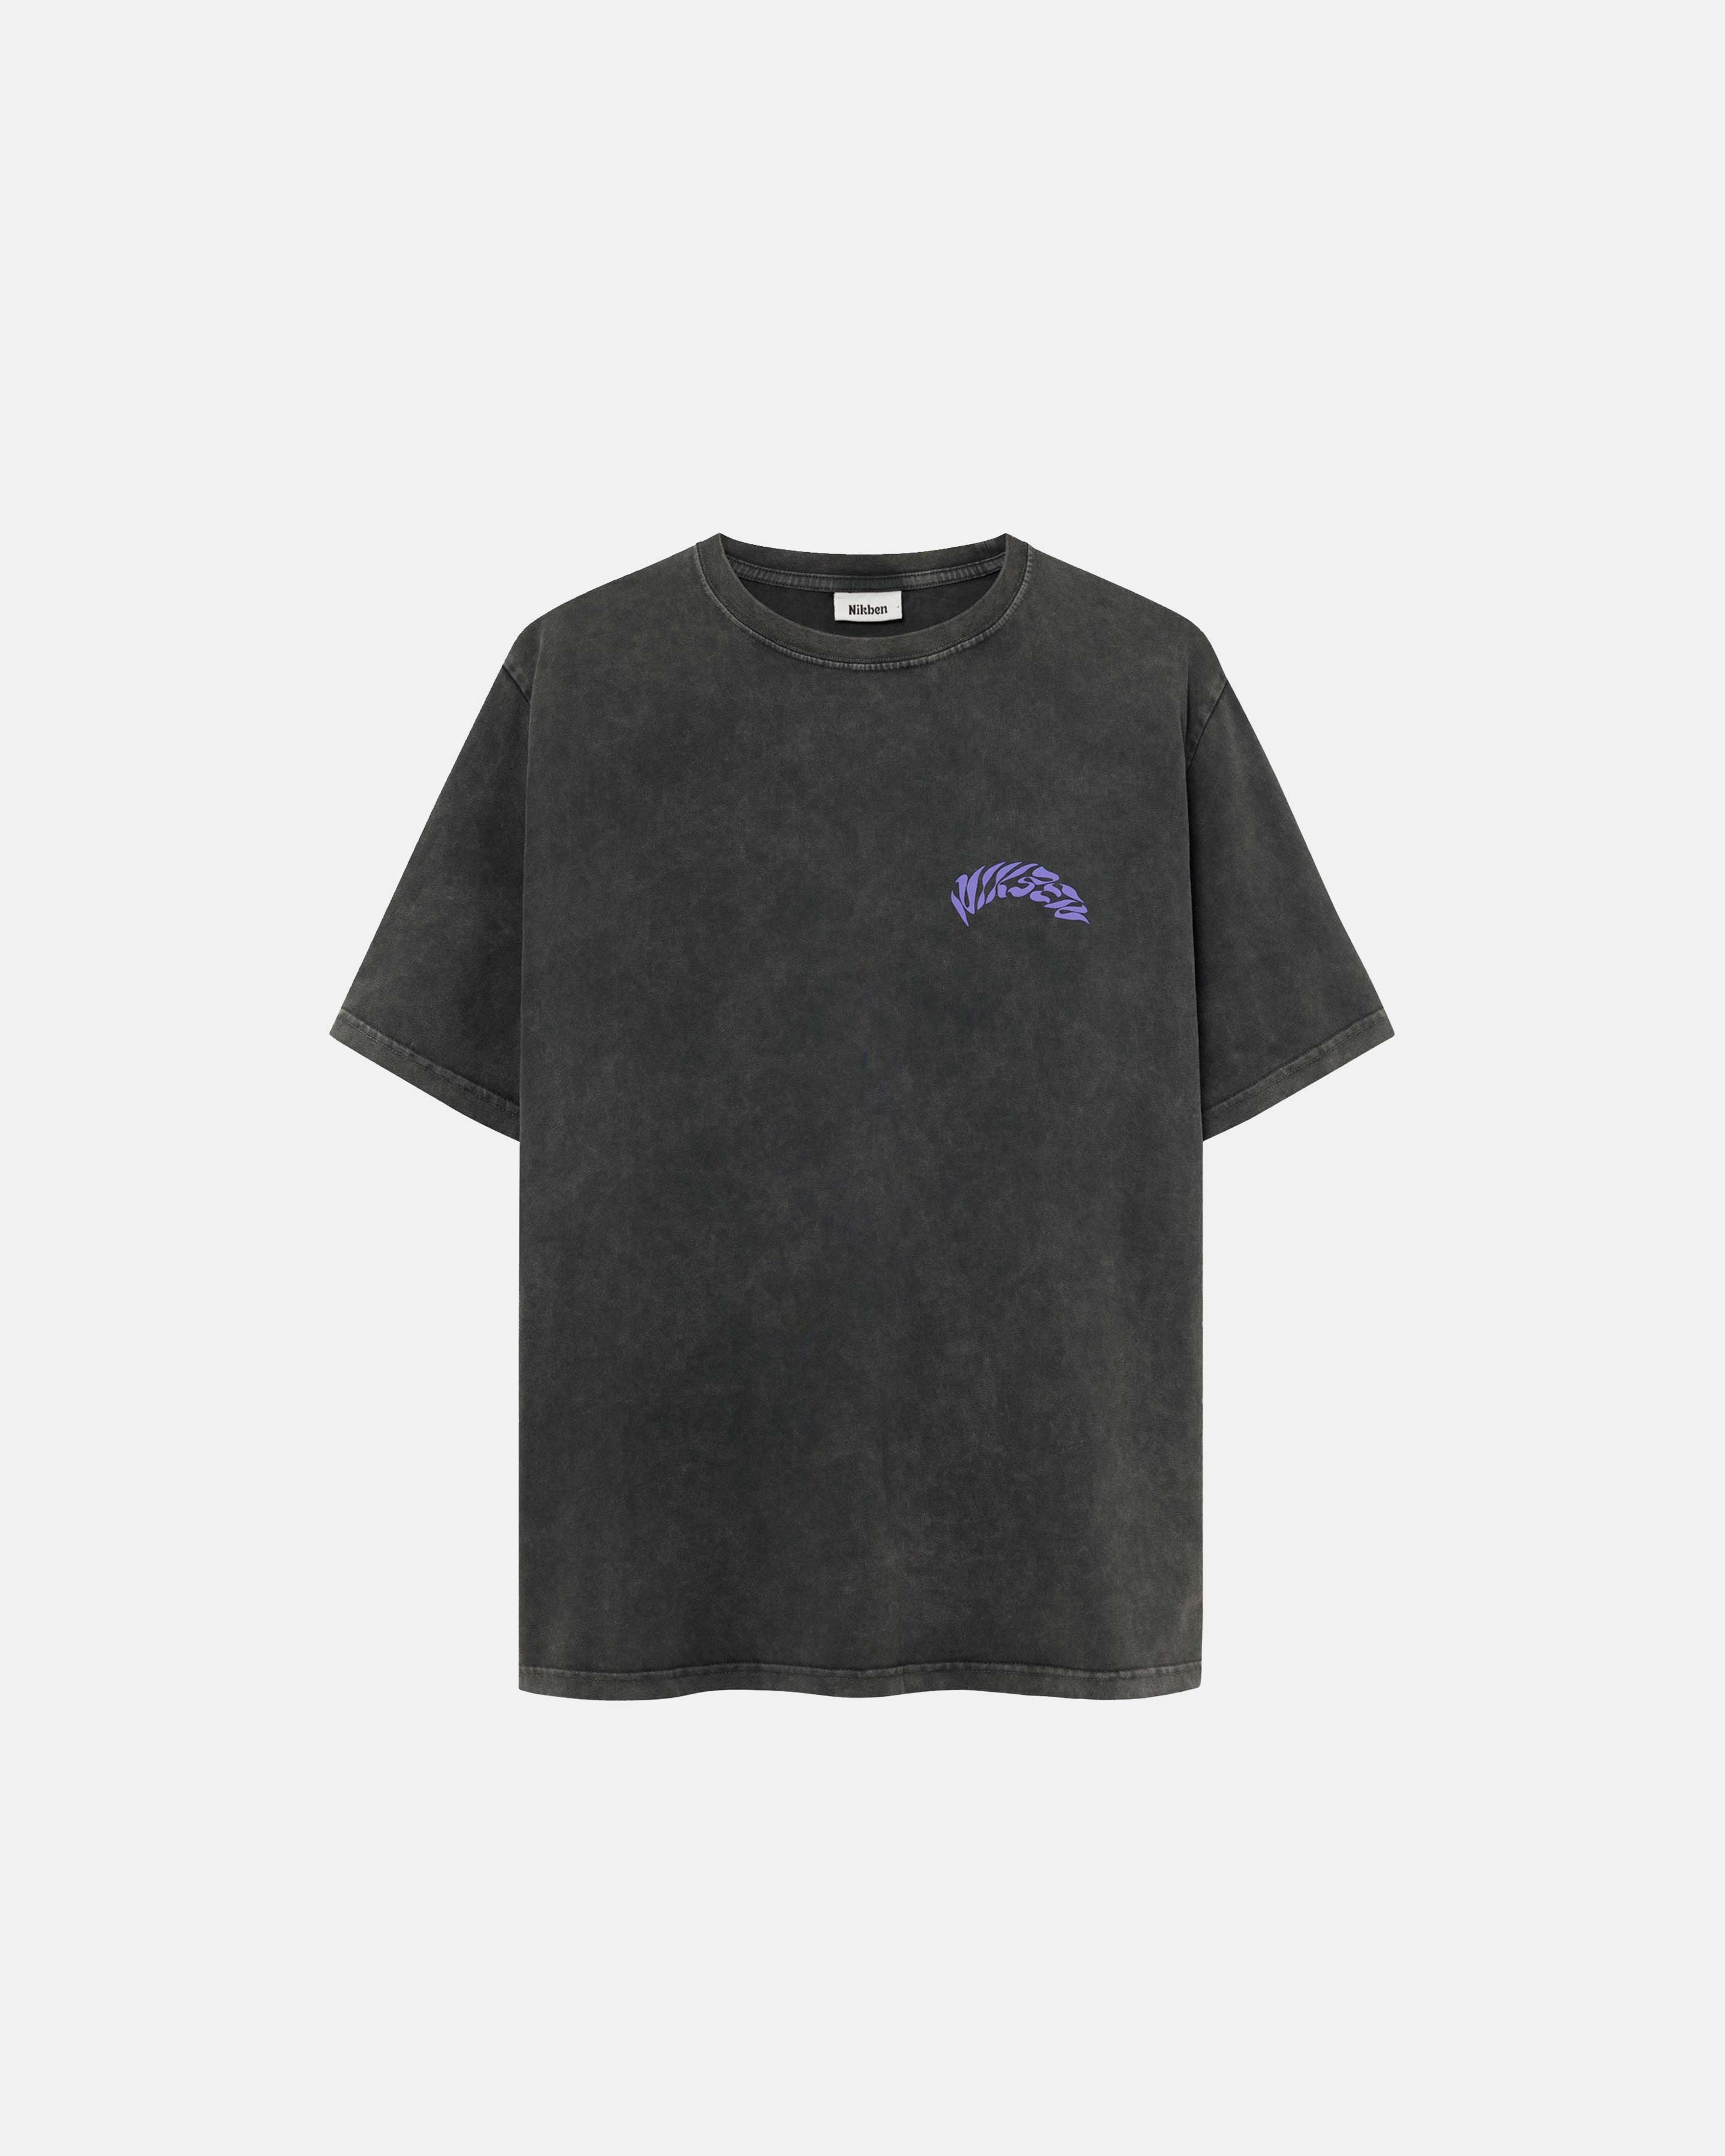 Washed black t-shirt with purple puffy "Nikben" logo in the chest.